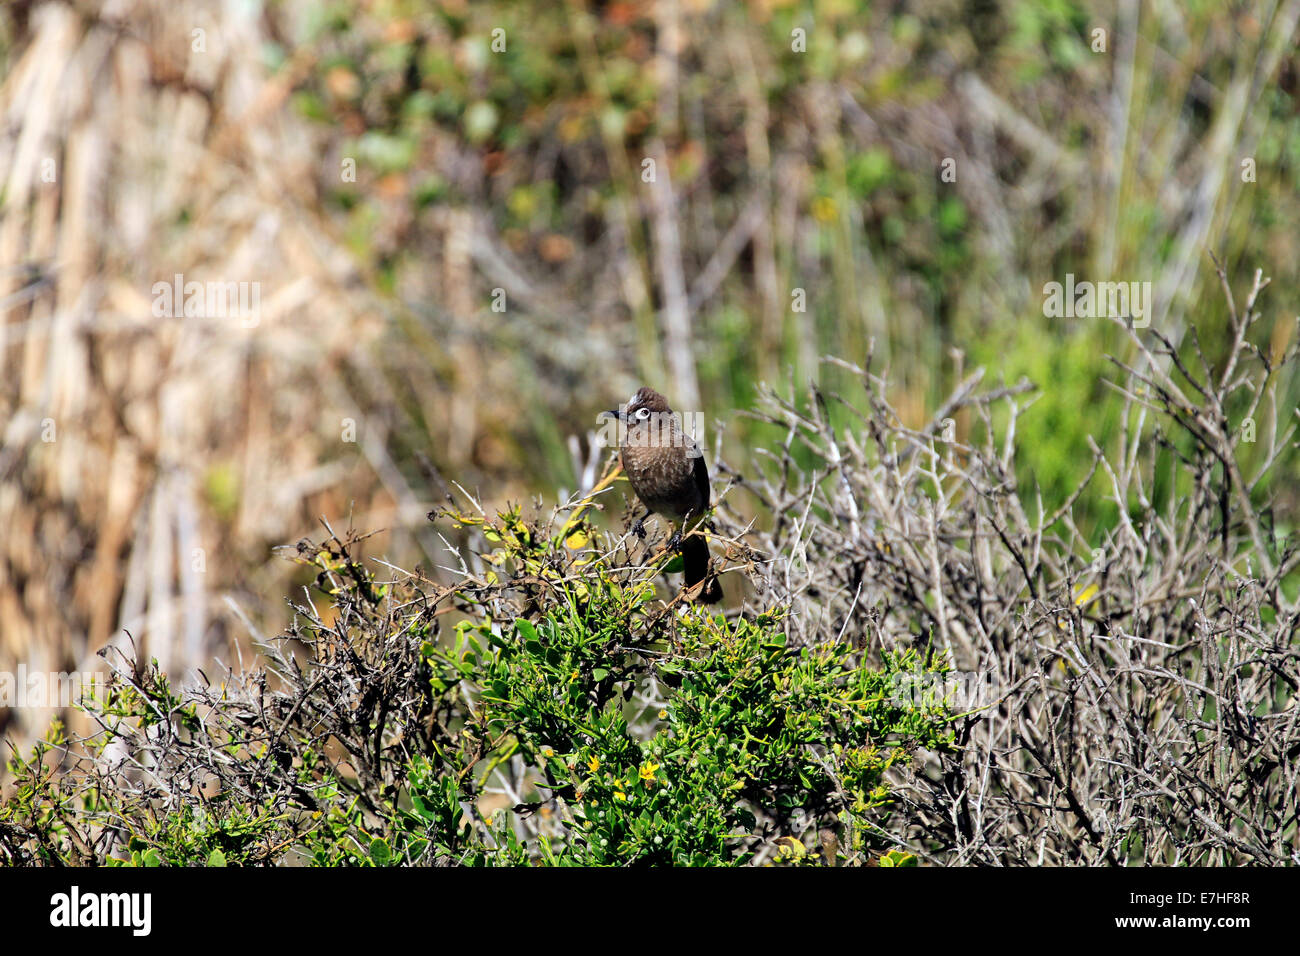 A Cape bulbul (Pycnonotus capensis) in the West Coast National Park near Langebaan, South Africa. Stock Photo